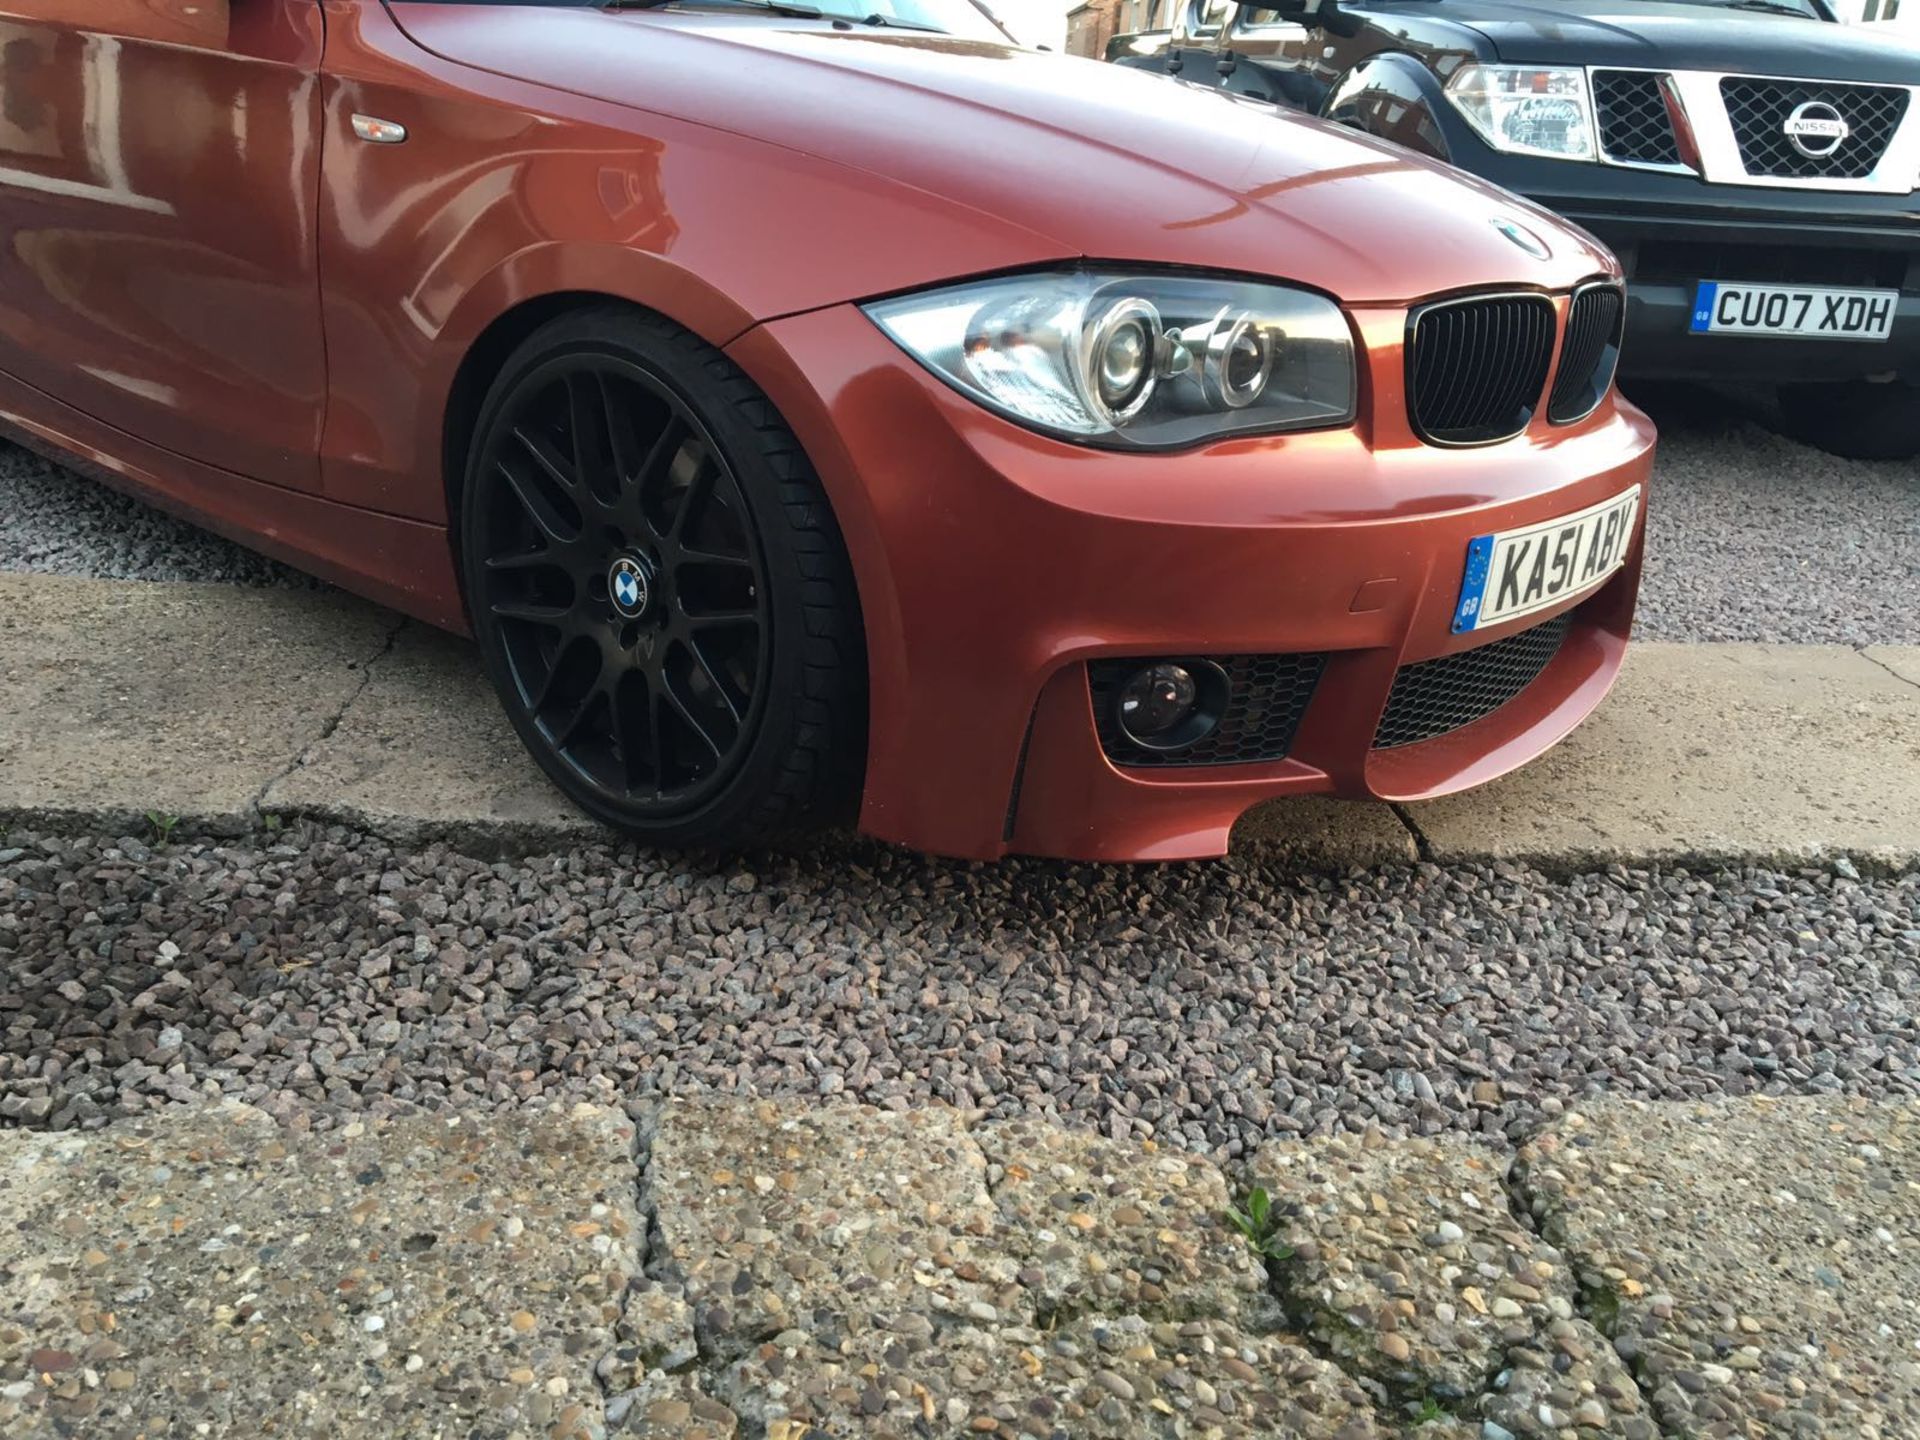 2008 BMW 123D M SPORT COUPE - 6 SPEED MANUAL GEARBOX *NO VAT* - Image 7 of 11